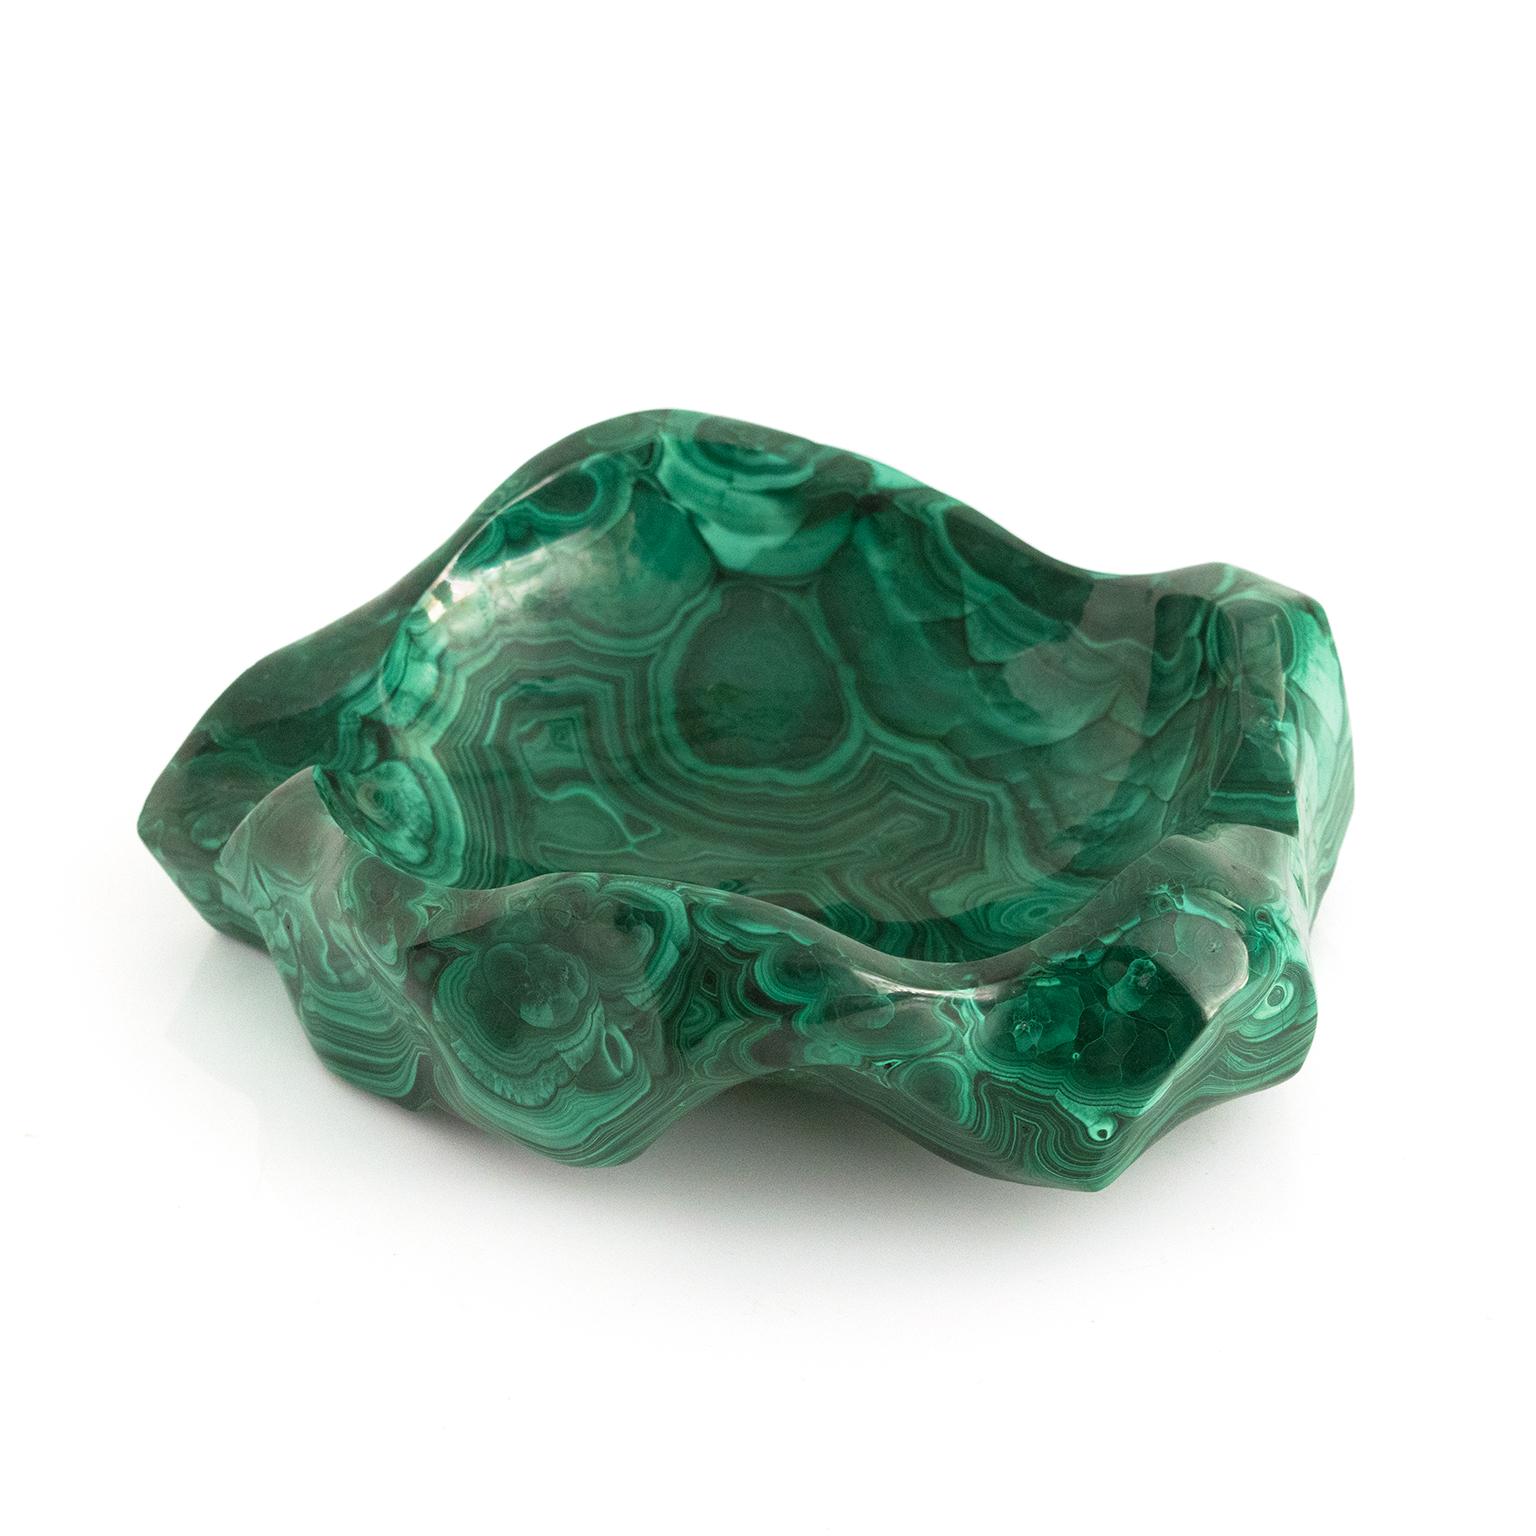 An organically carved stone bowl made from a single piece of polished malachite.

Measures: Width: 9” x 7” Height: 2.5”.